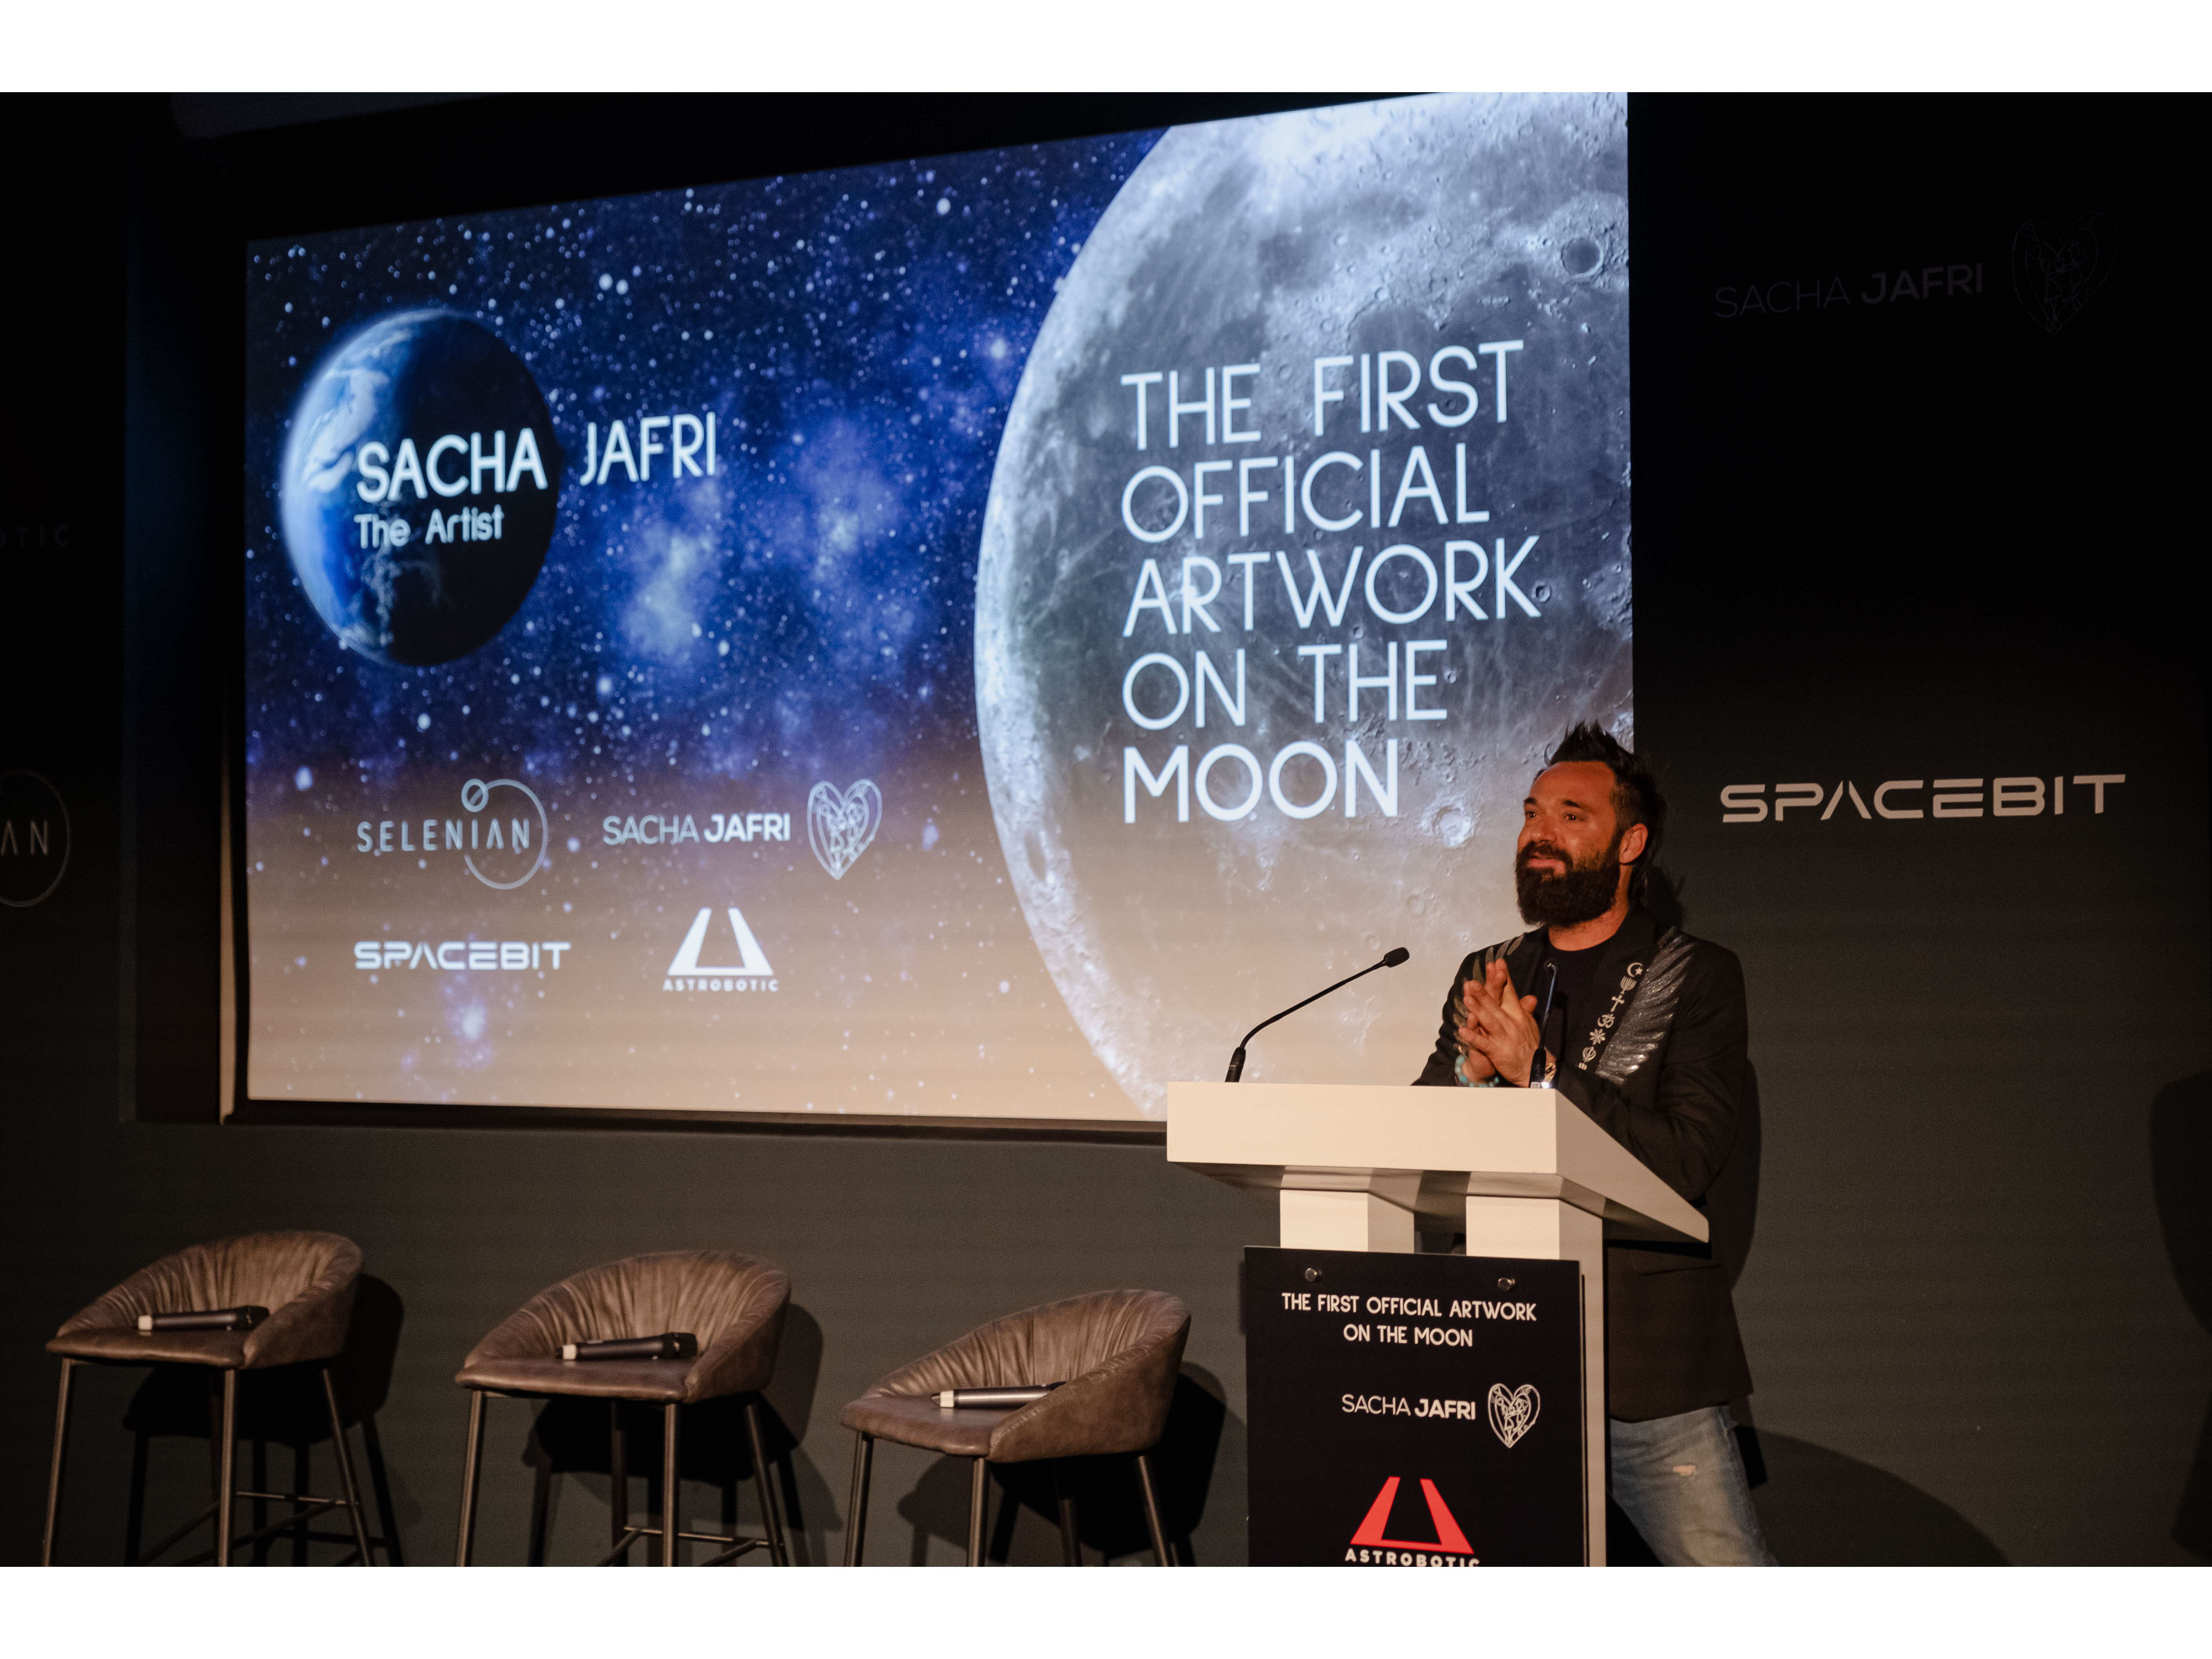 The world's first official artwork on the Moon is signed Sacha Jafri